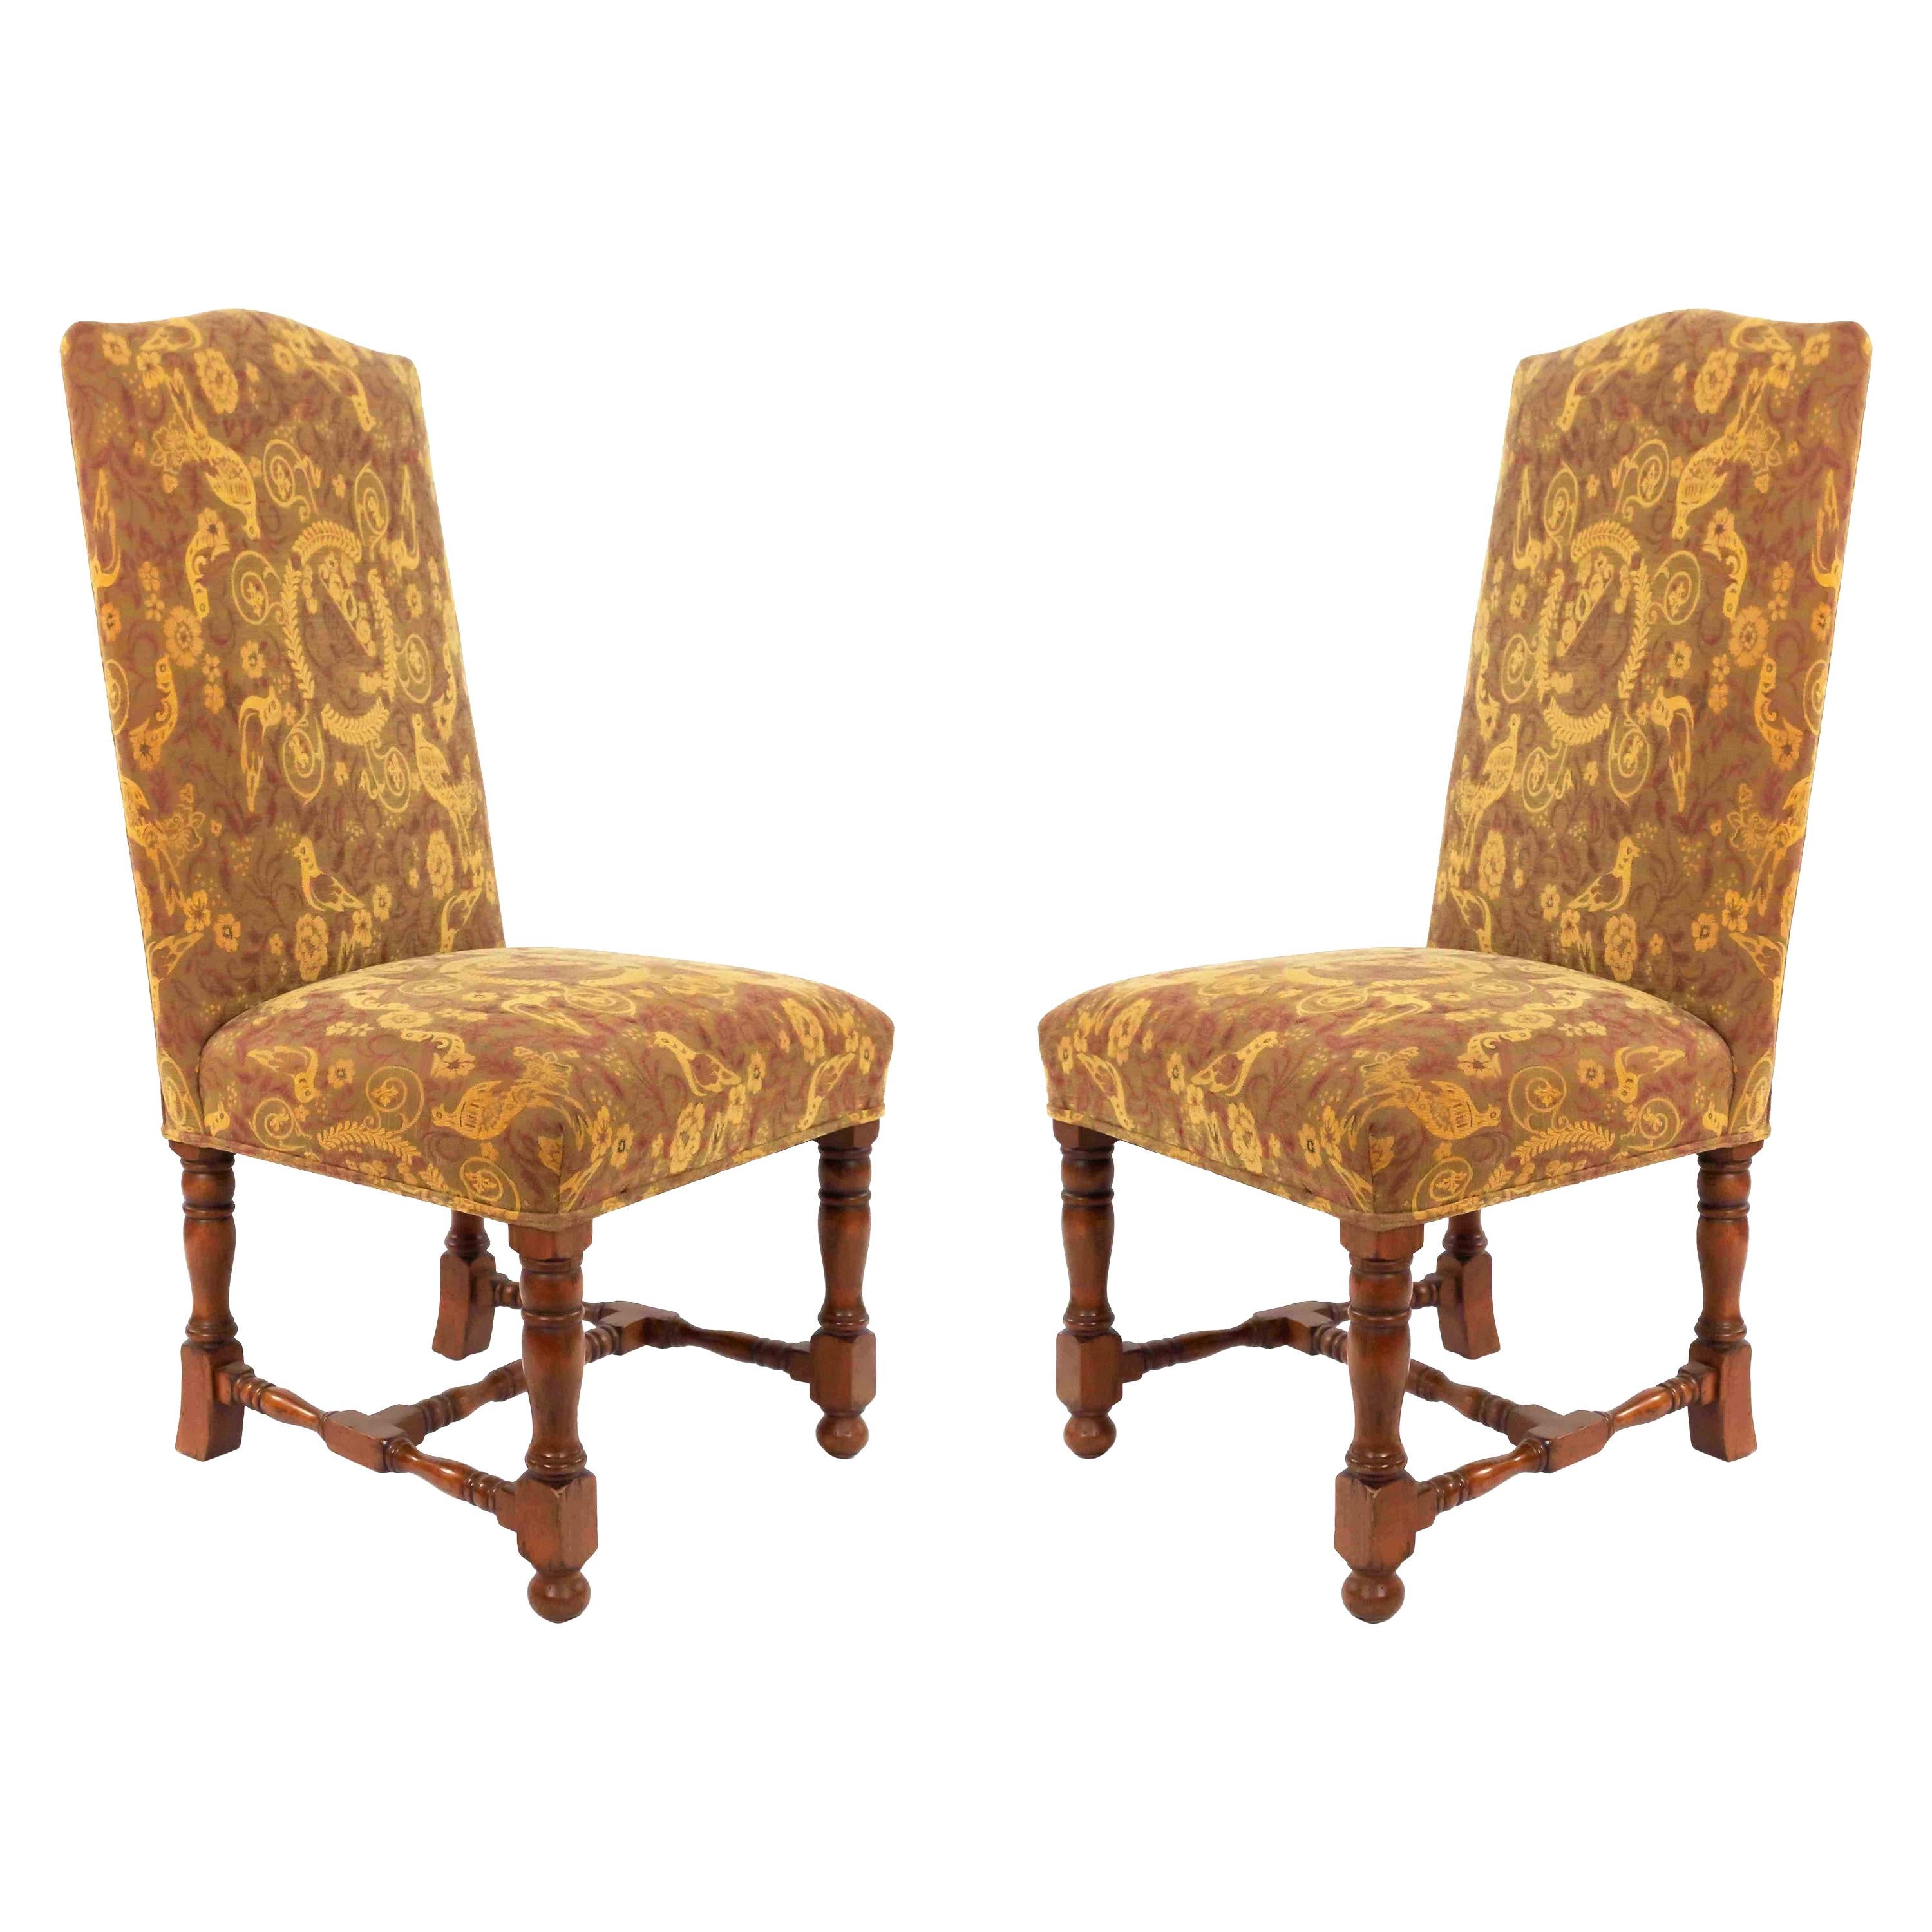 High Back Renaissance Style Dining Chairs with Floral Upholstery